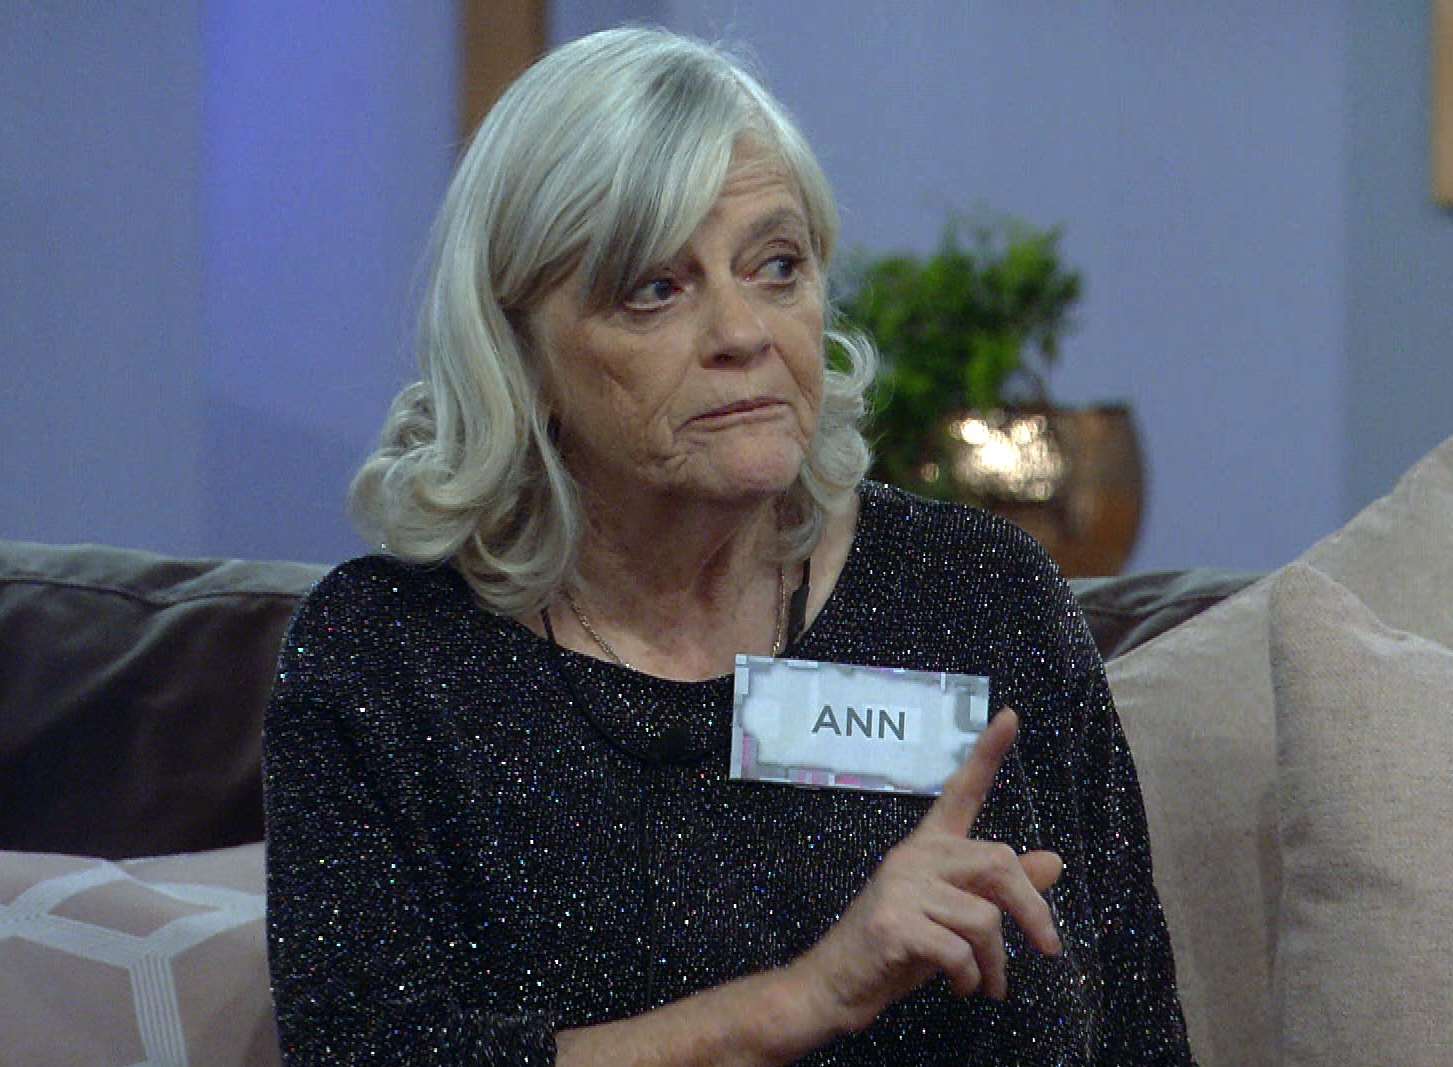 Ann Widdecombe, 70, was the first to enter the CBB house on Tuesday, January 2.